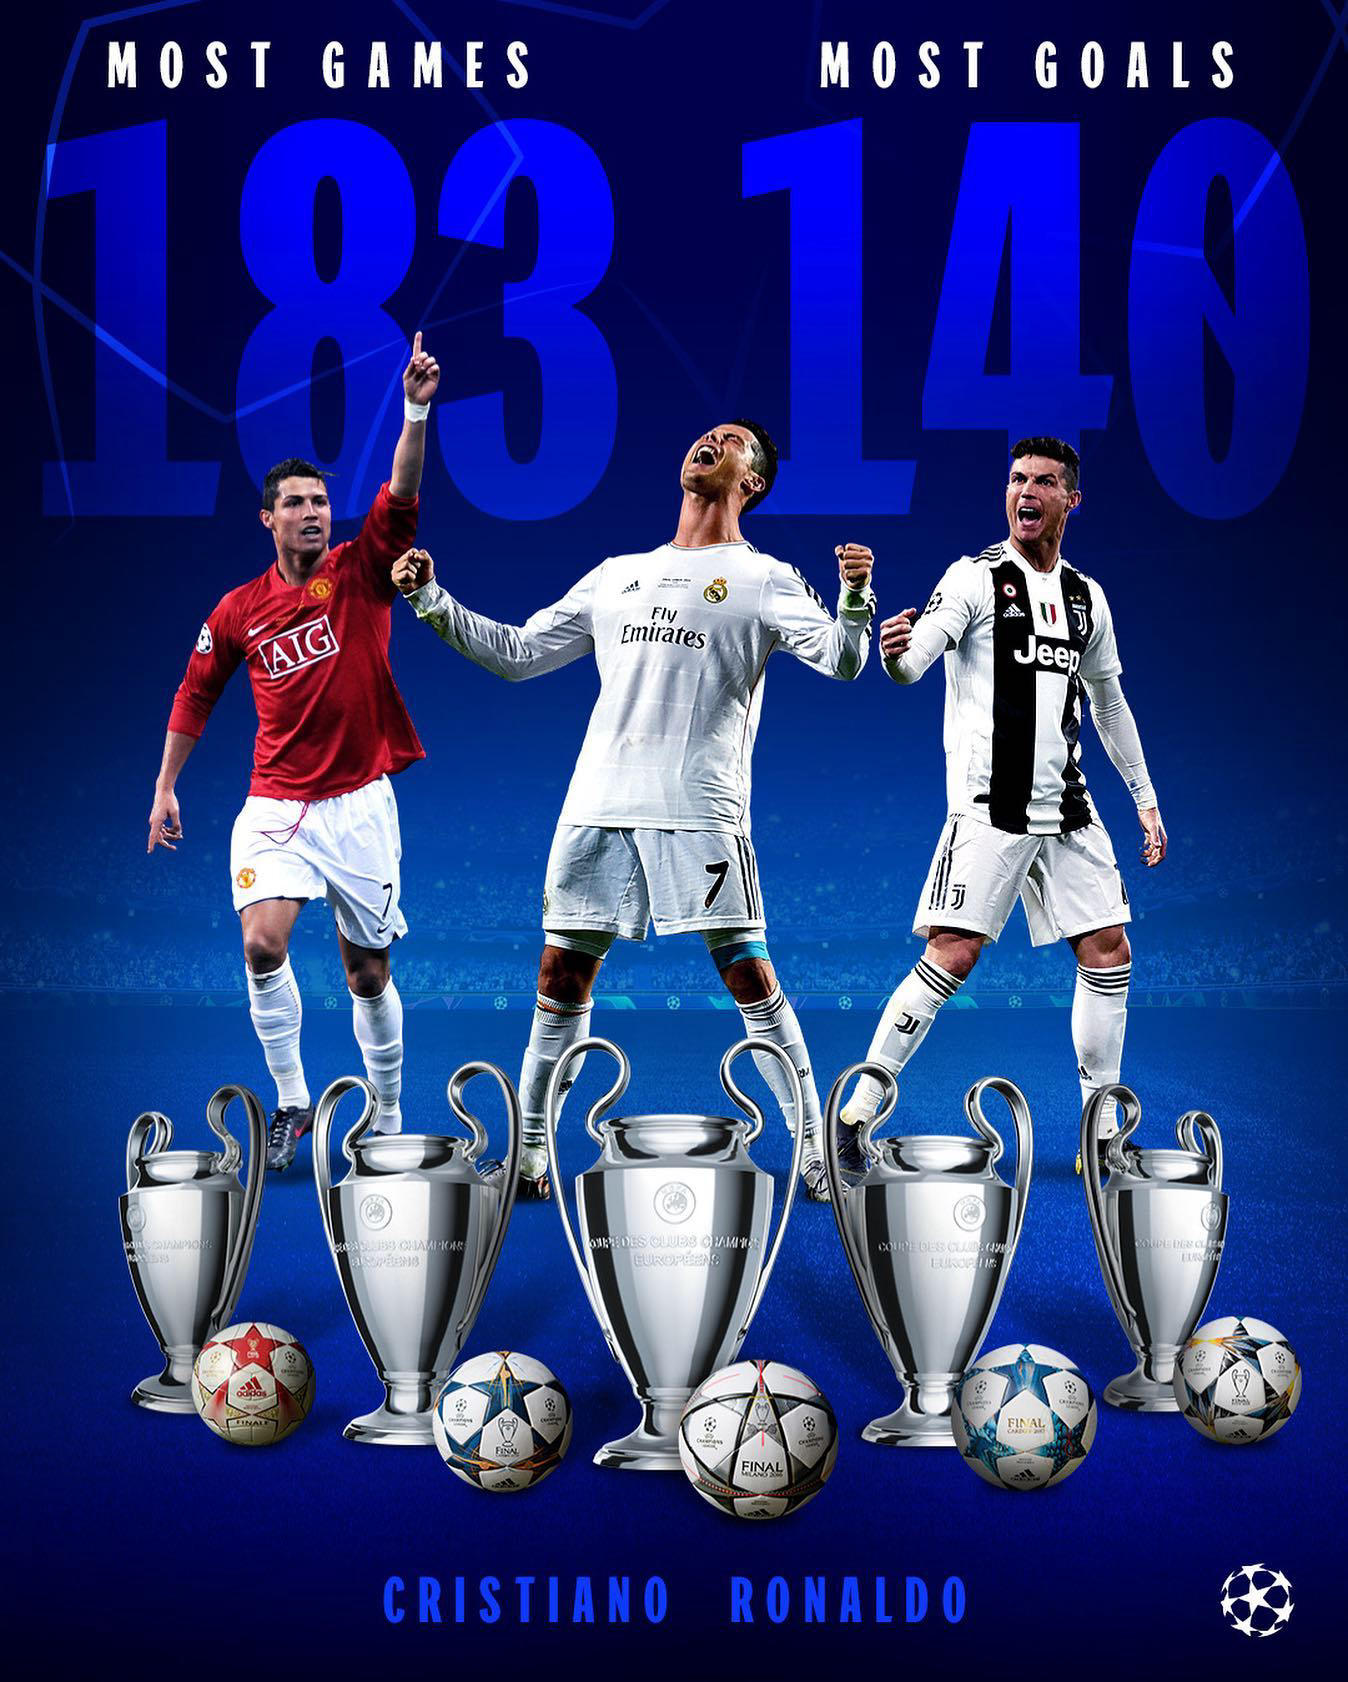 UEFA Champions League - Forever a Champions League icon